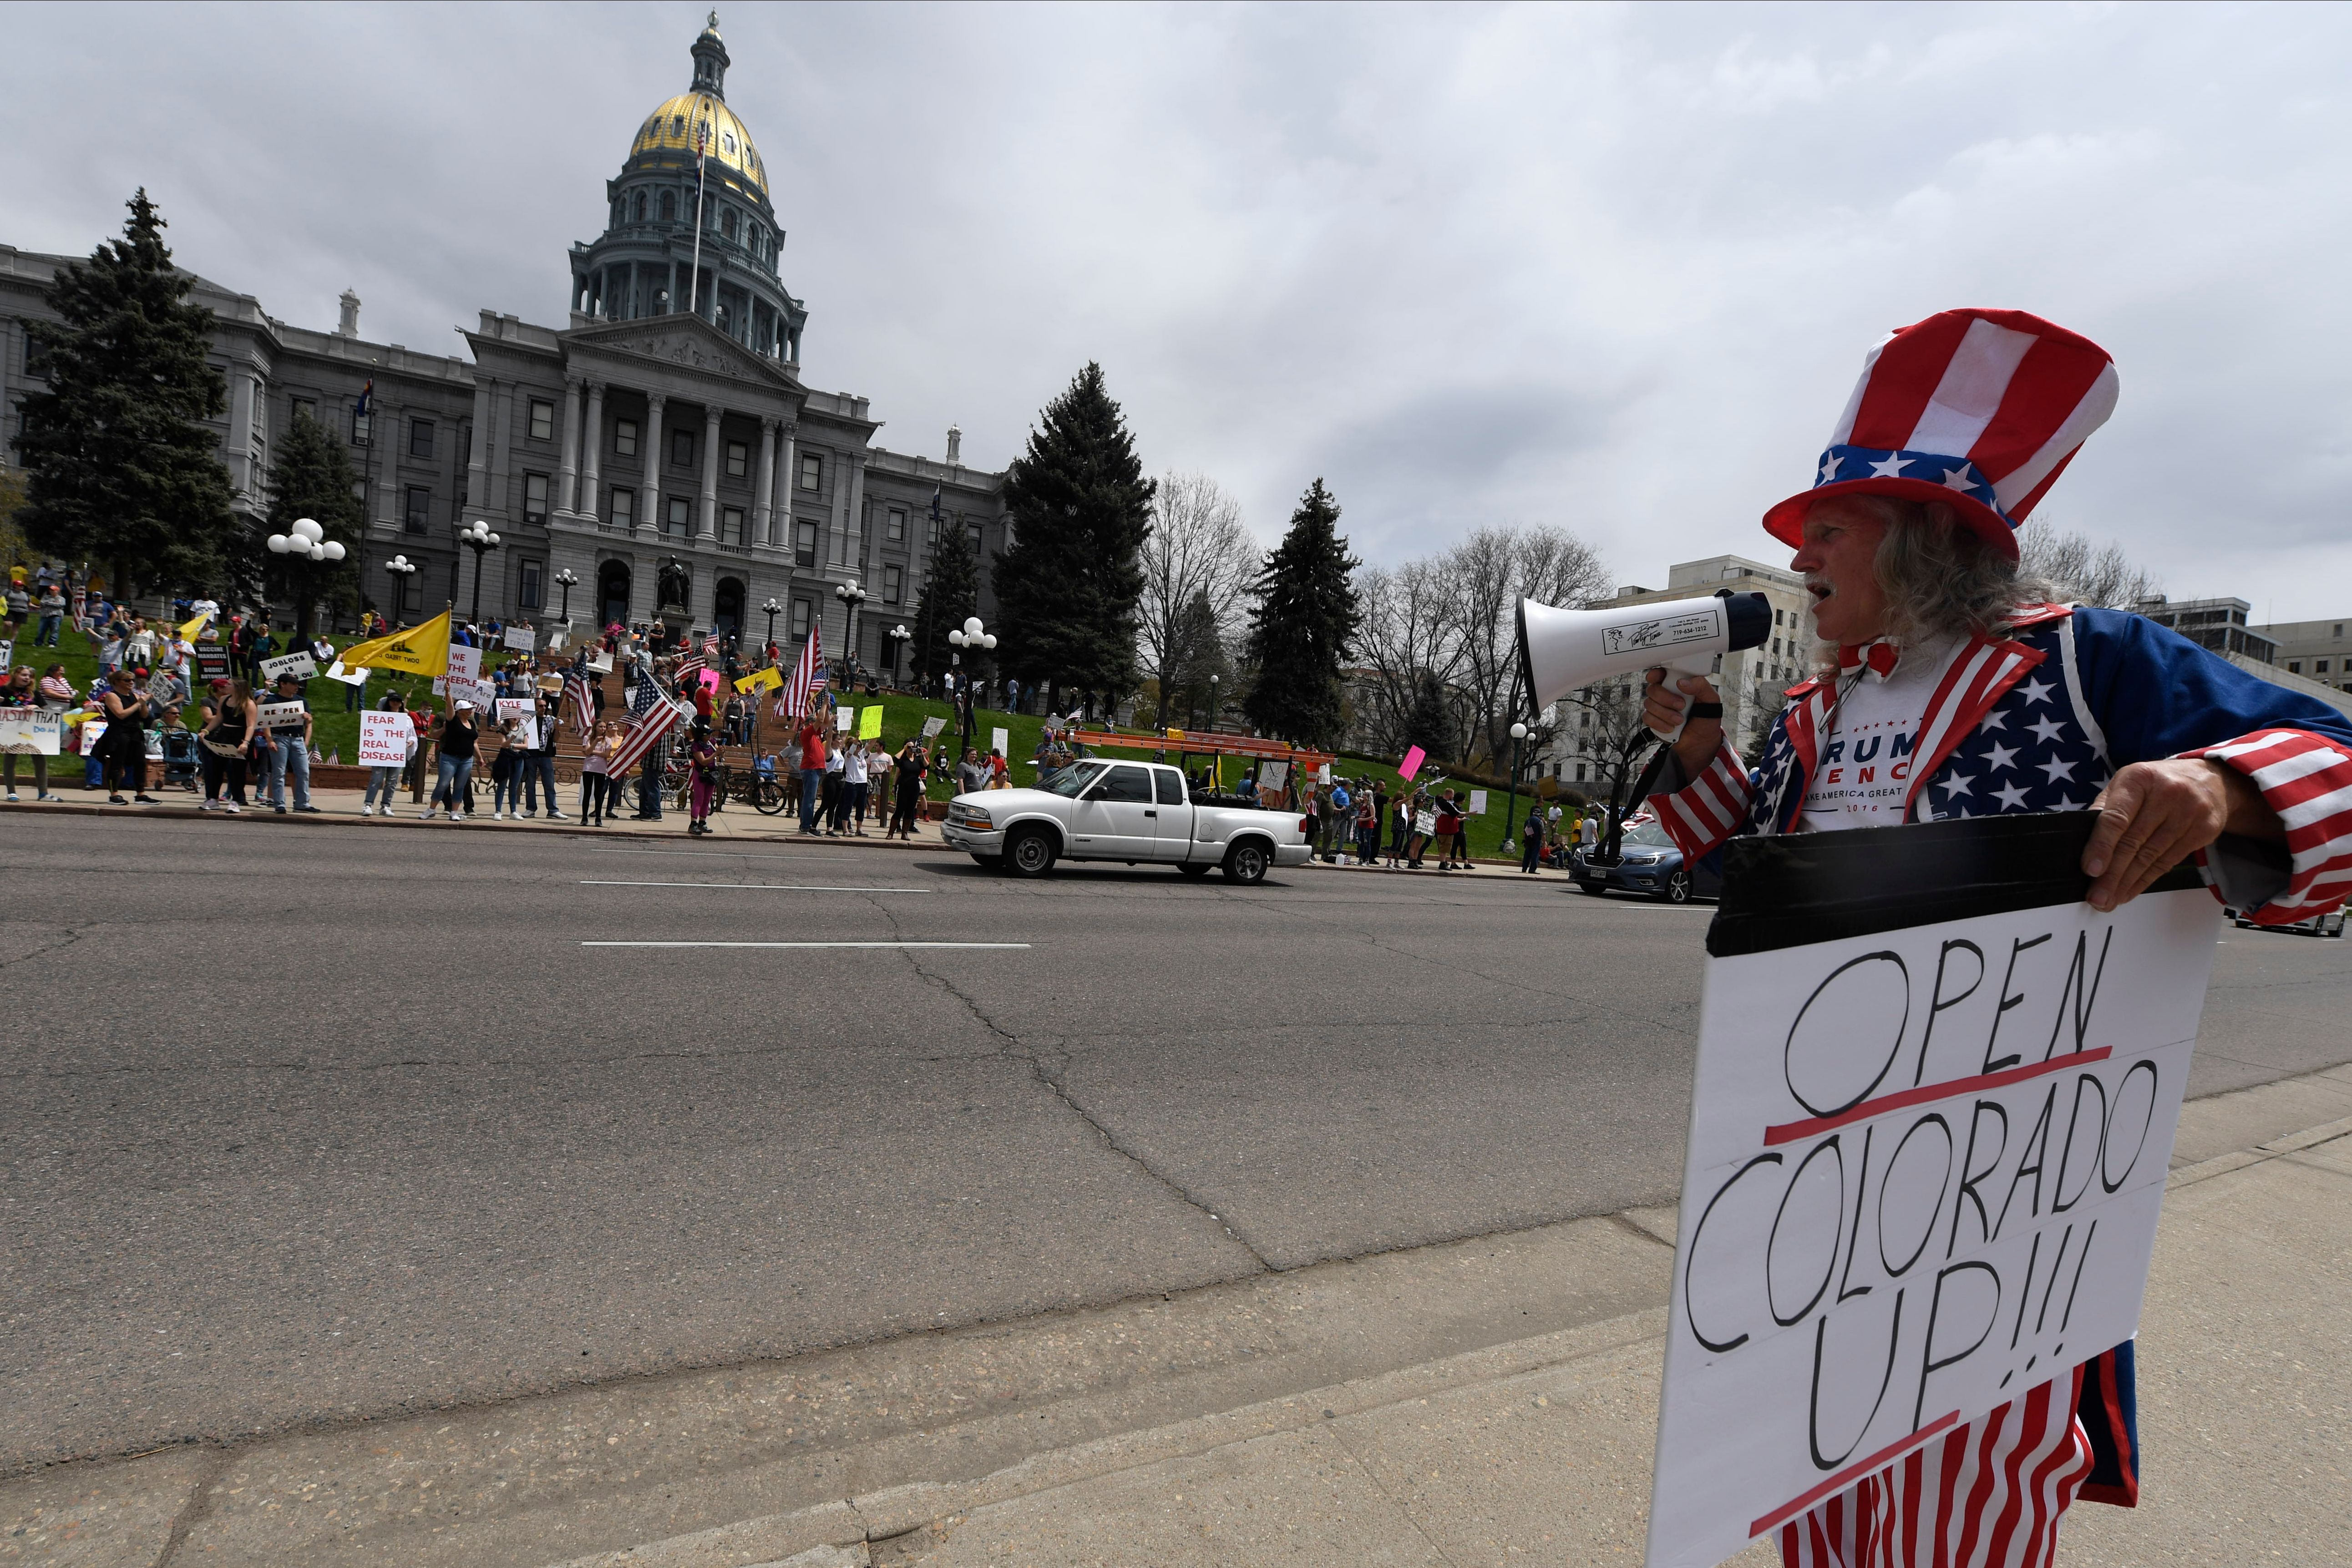 Jim Fenimore of Colorado Springs, Colorado wears an Uncle Sam outfit while protesting against new safer-at-home orders during the End the Lockdown Now rally. (Photo by JASON CONNOLLY/Agence France-Presse/AFP via Getty Images)